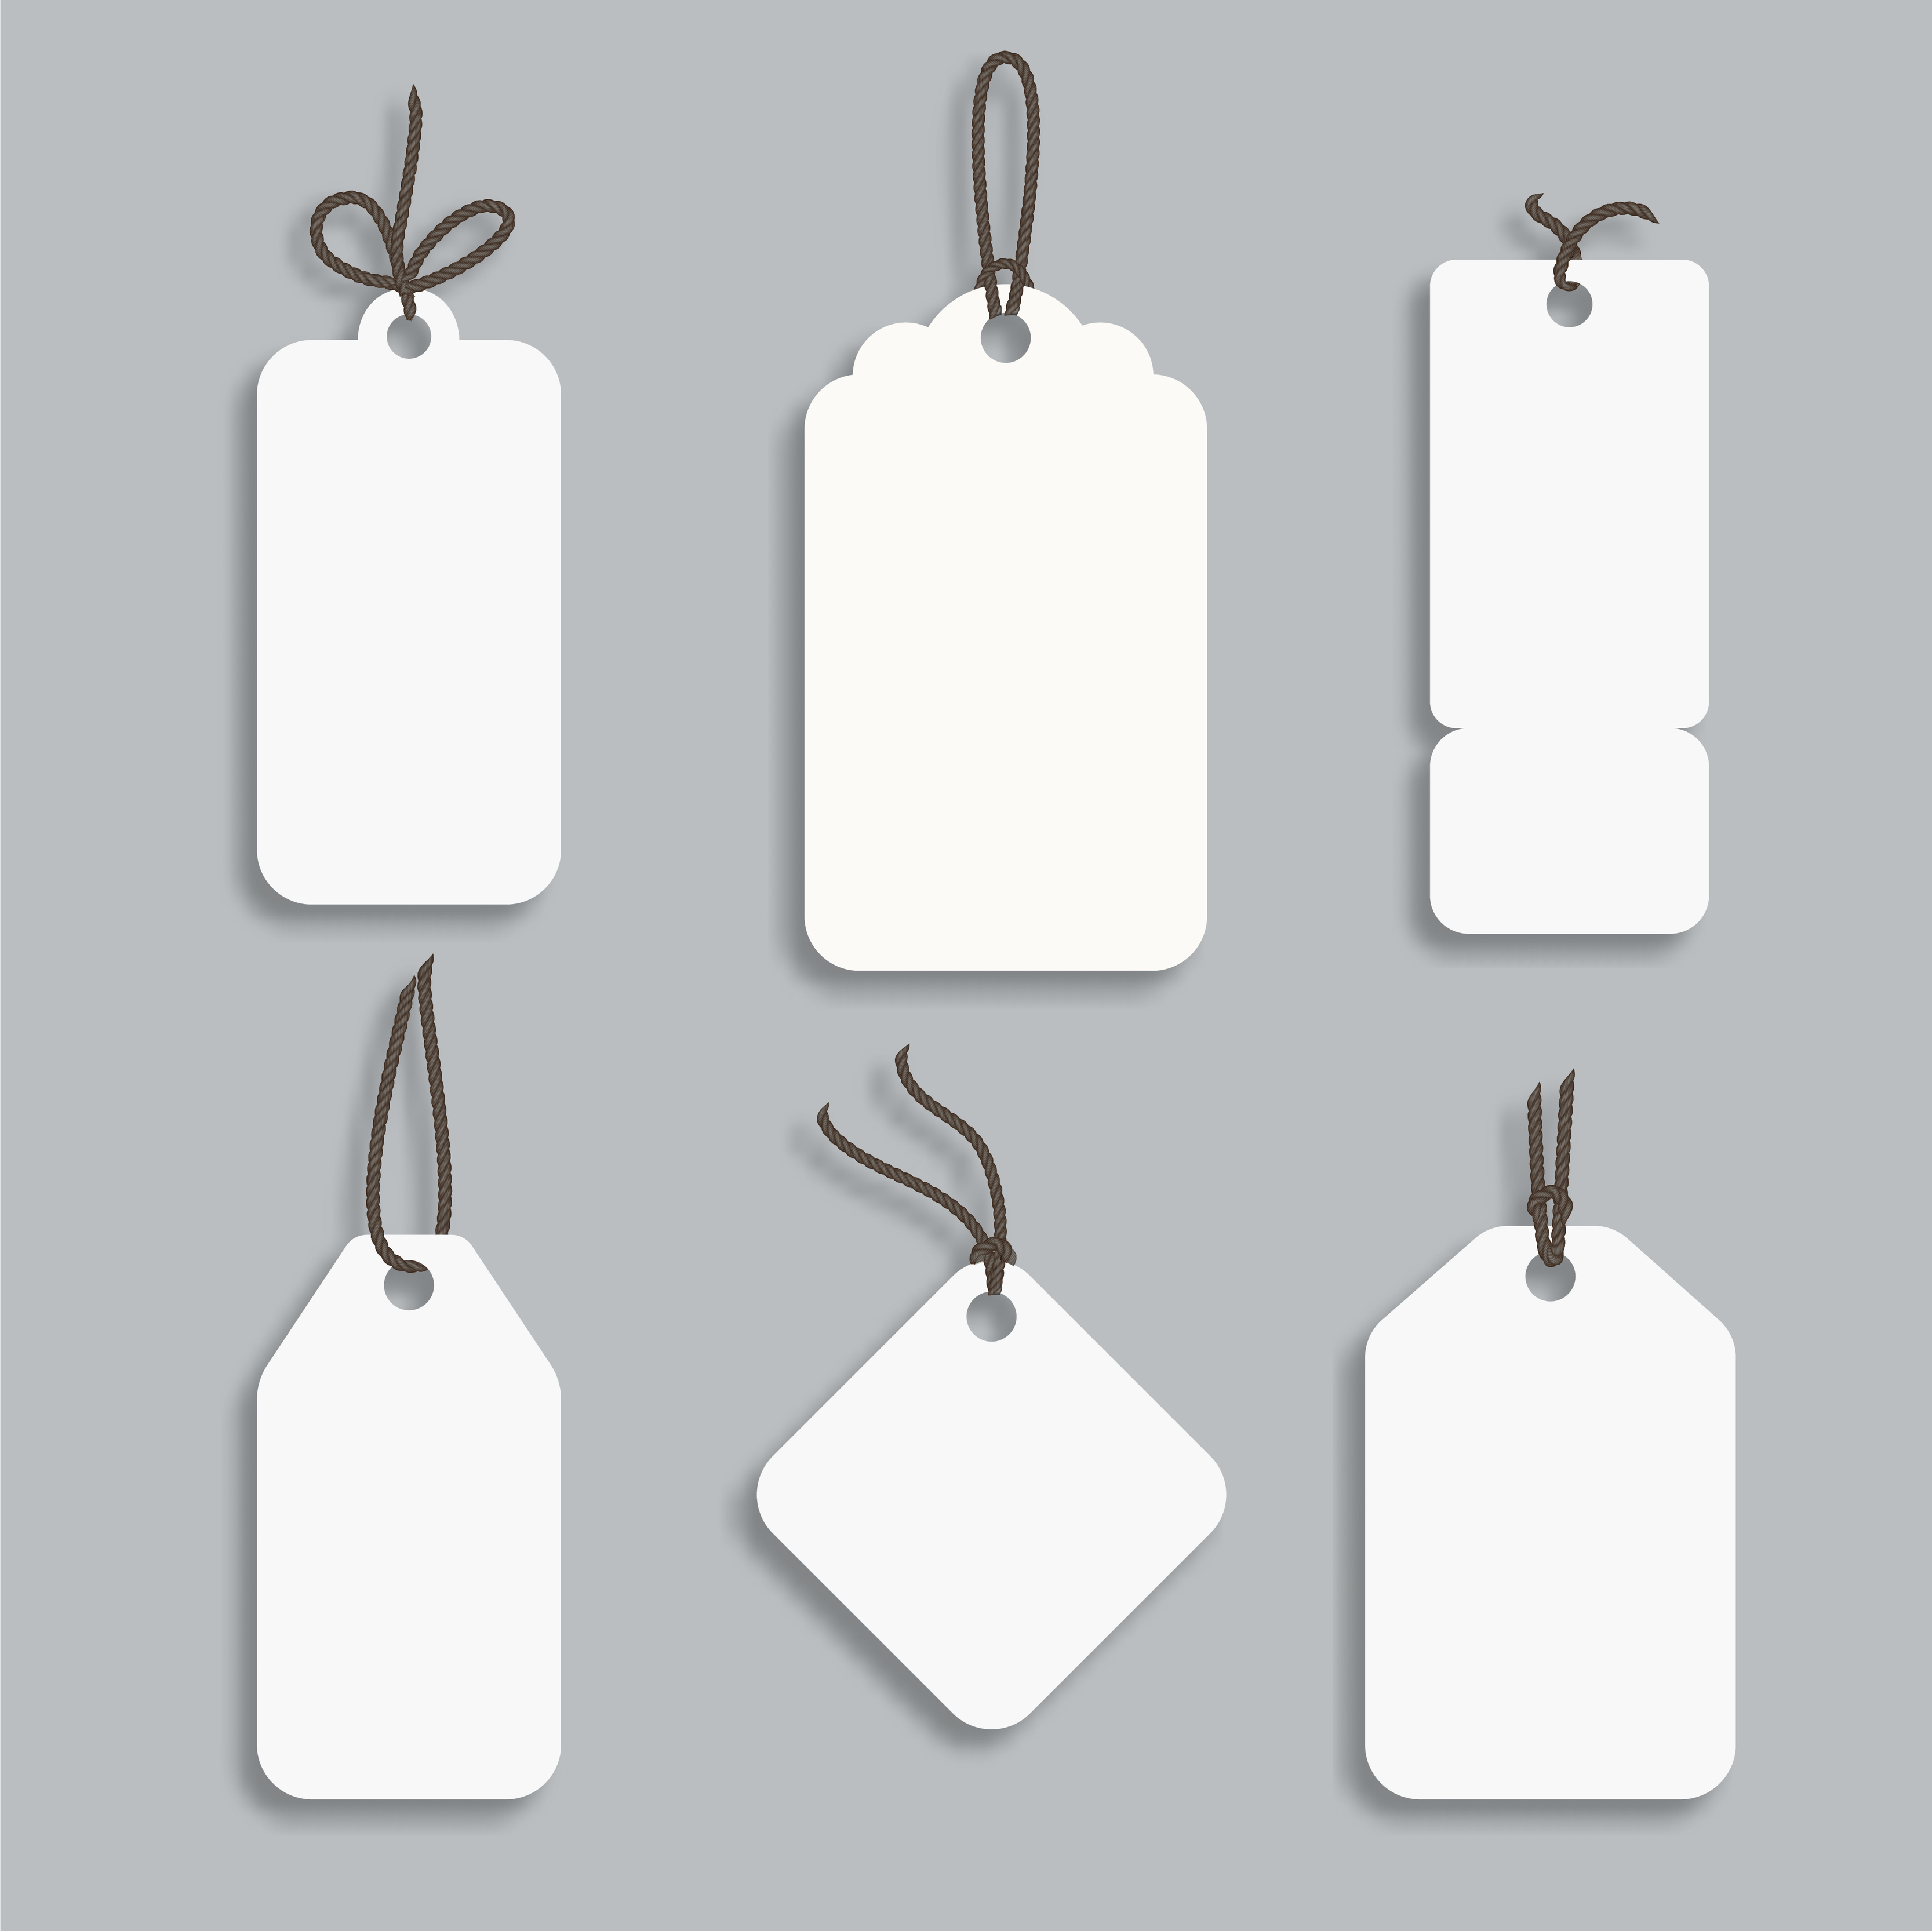 white-paper-price-tag-or-gift-tag-in-different-shapes-set-of-labels